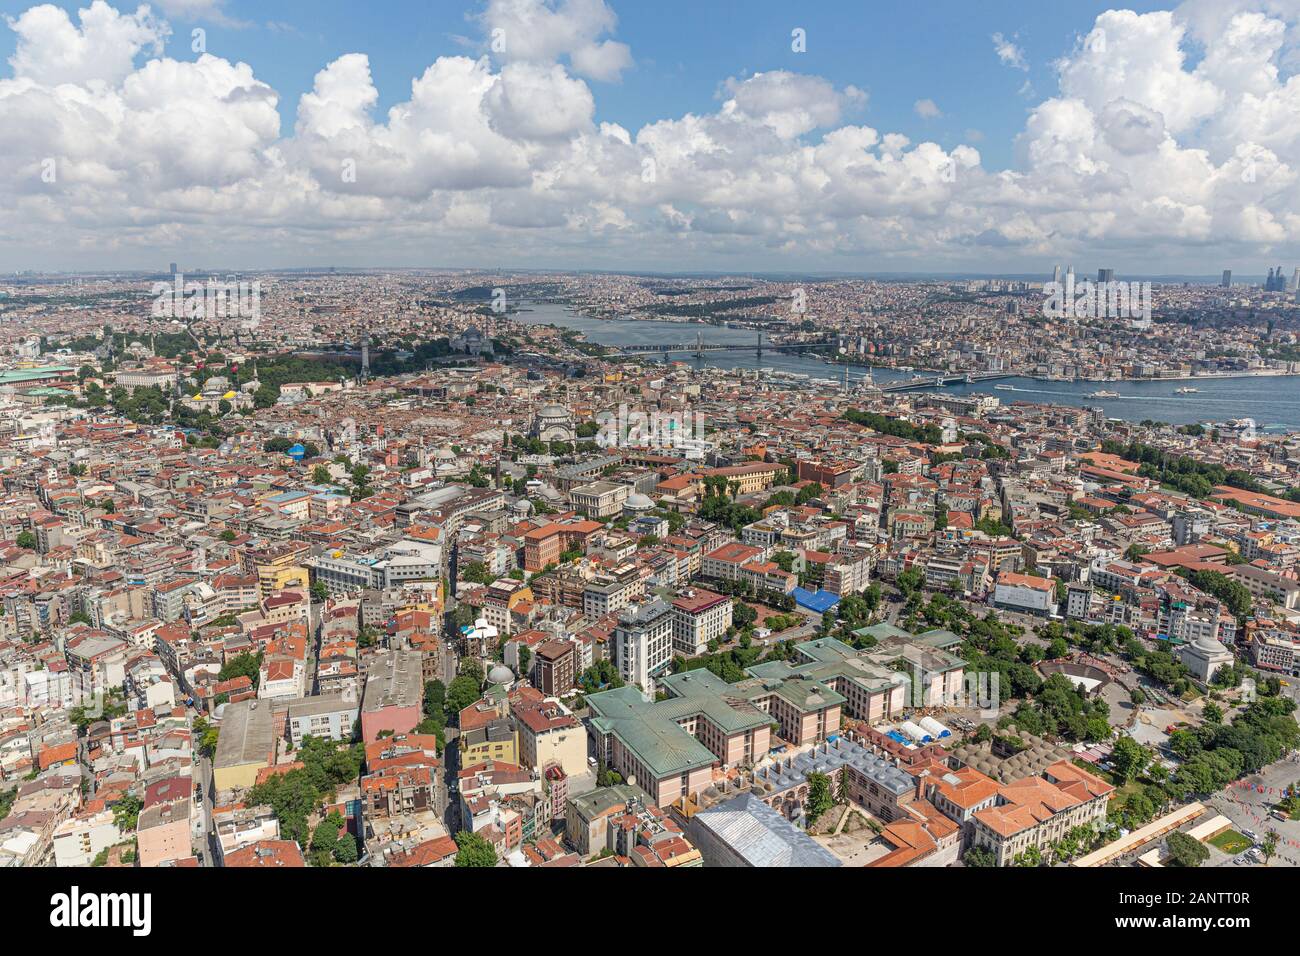 Istanbul aerial photo; Sultanahmet Square, Cemberlitas, Grand Bazaar, Beyazit Square, view from helicopter. Stock Photo